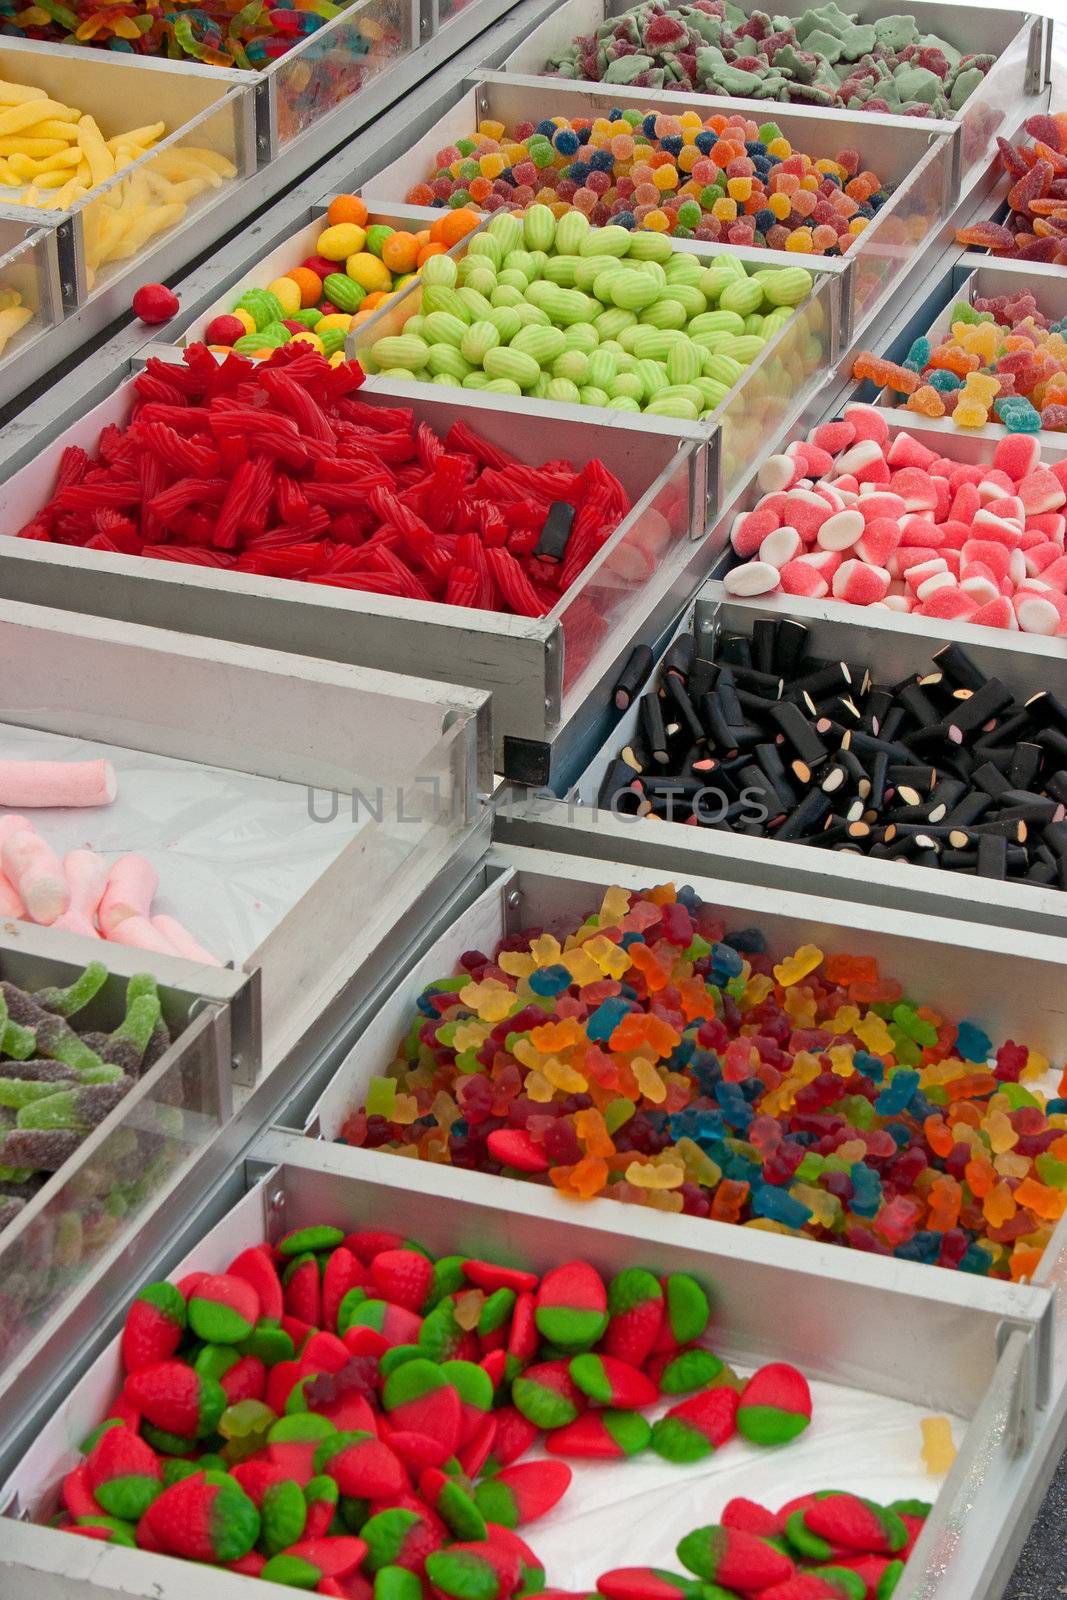 Candy shop at the market